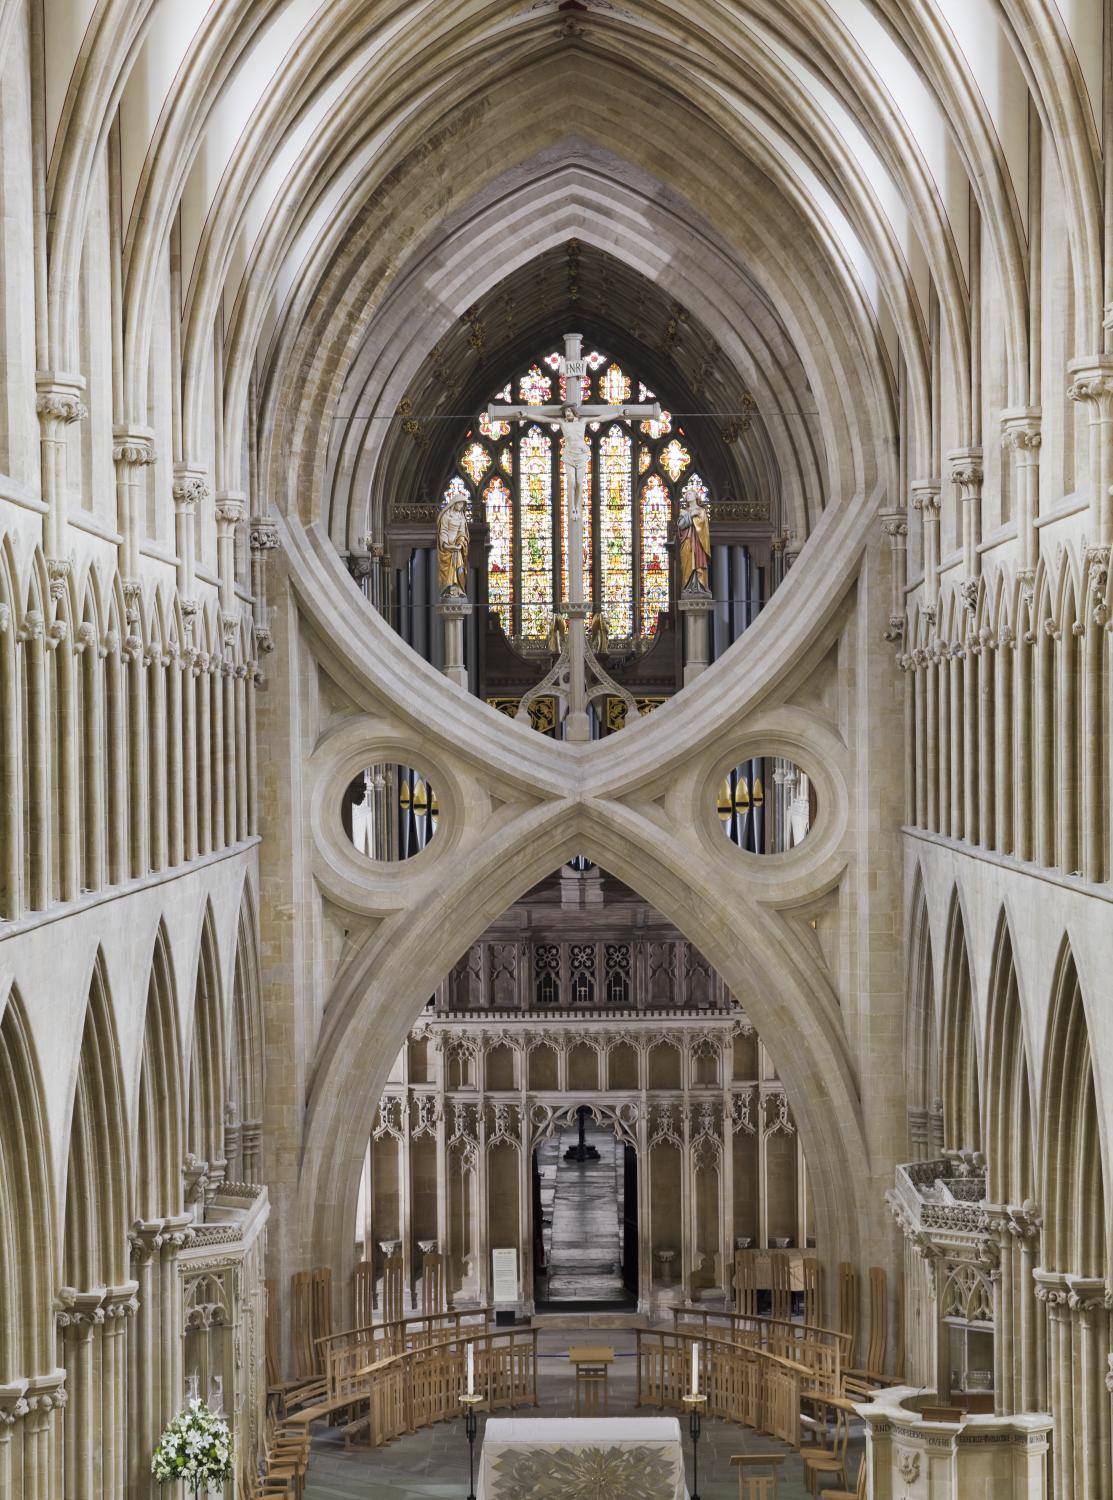 Elevated general view of the interior of Wells Cathedral.